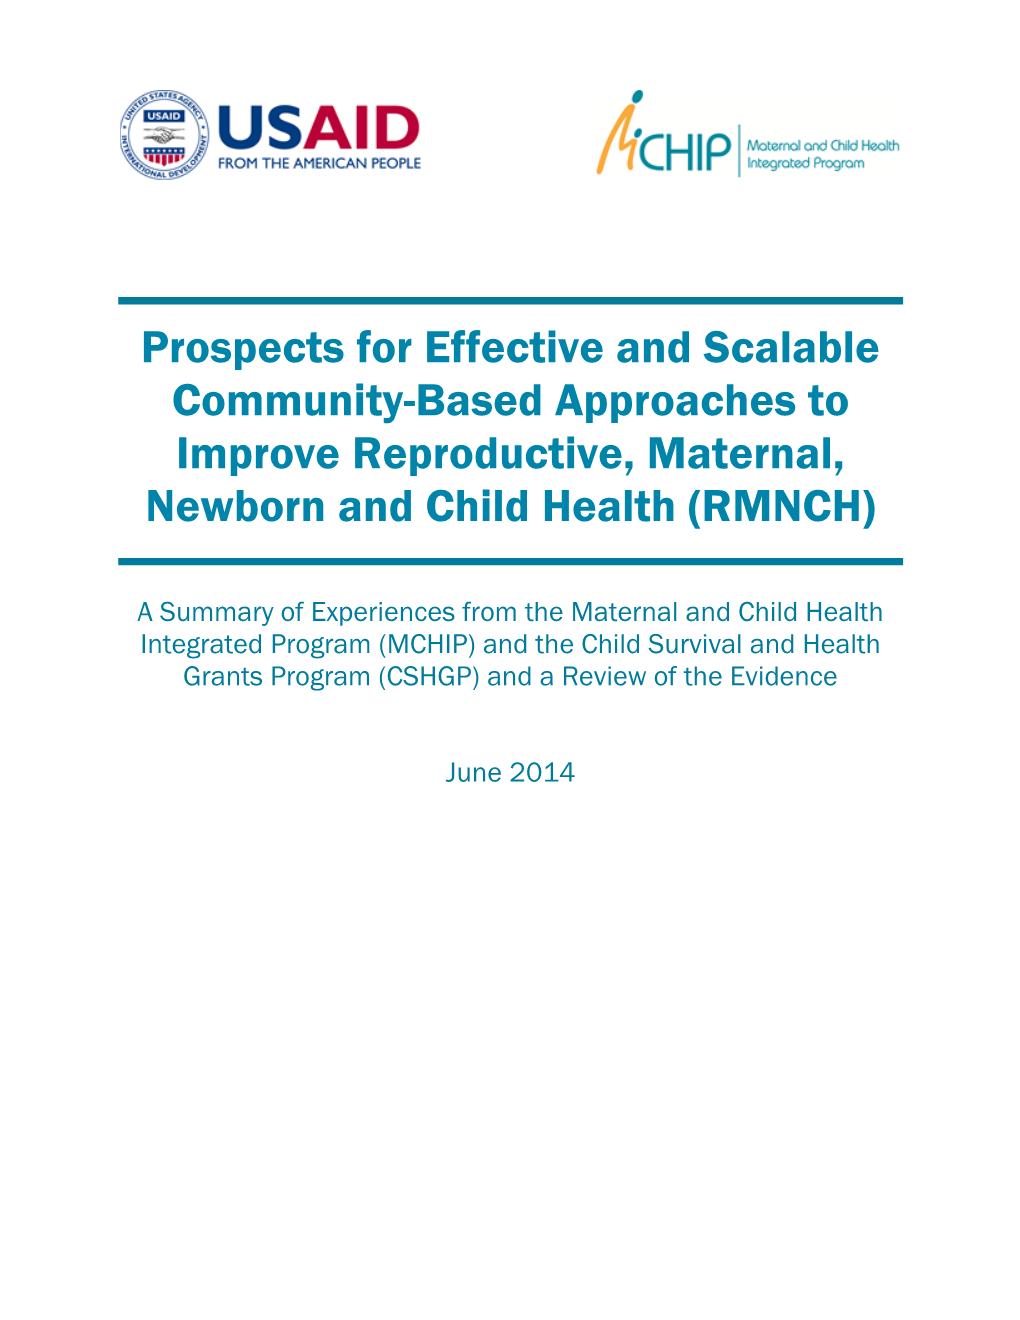 Prospects for Effective and Scalable Community-Based Approaches to Improve Reproductive, Maternal, Newborn and Child Health (RMNCH)